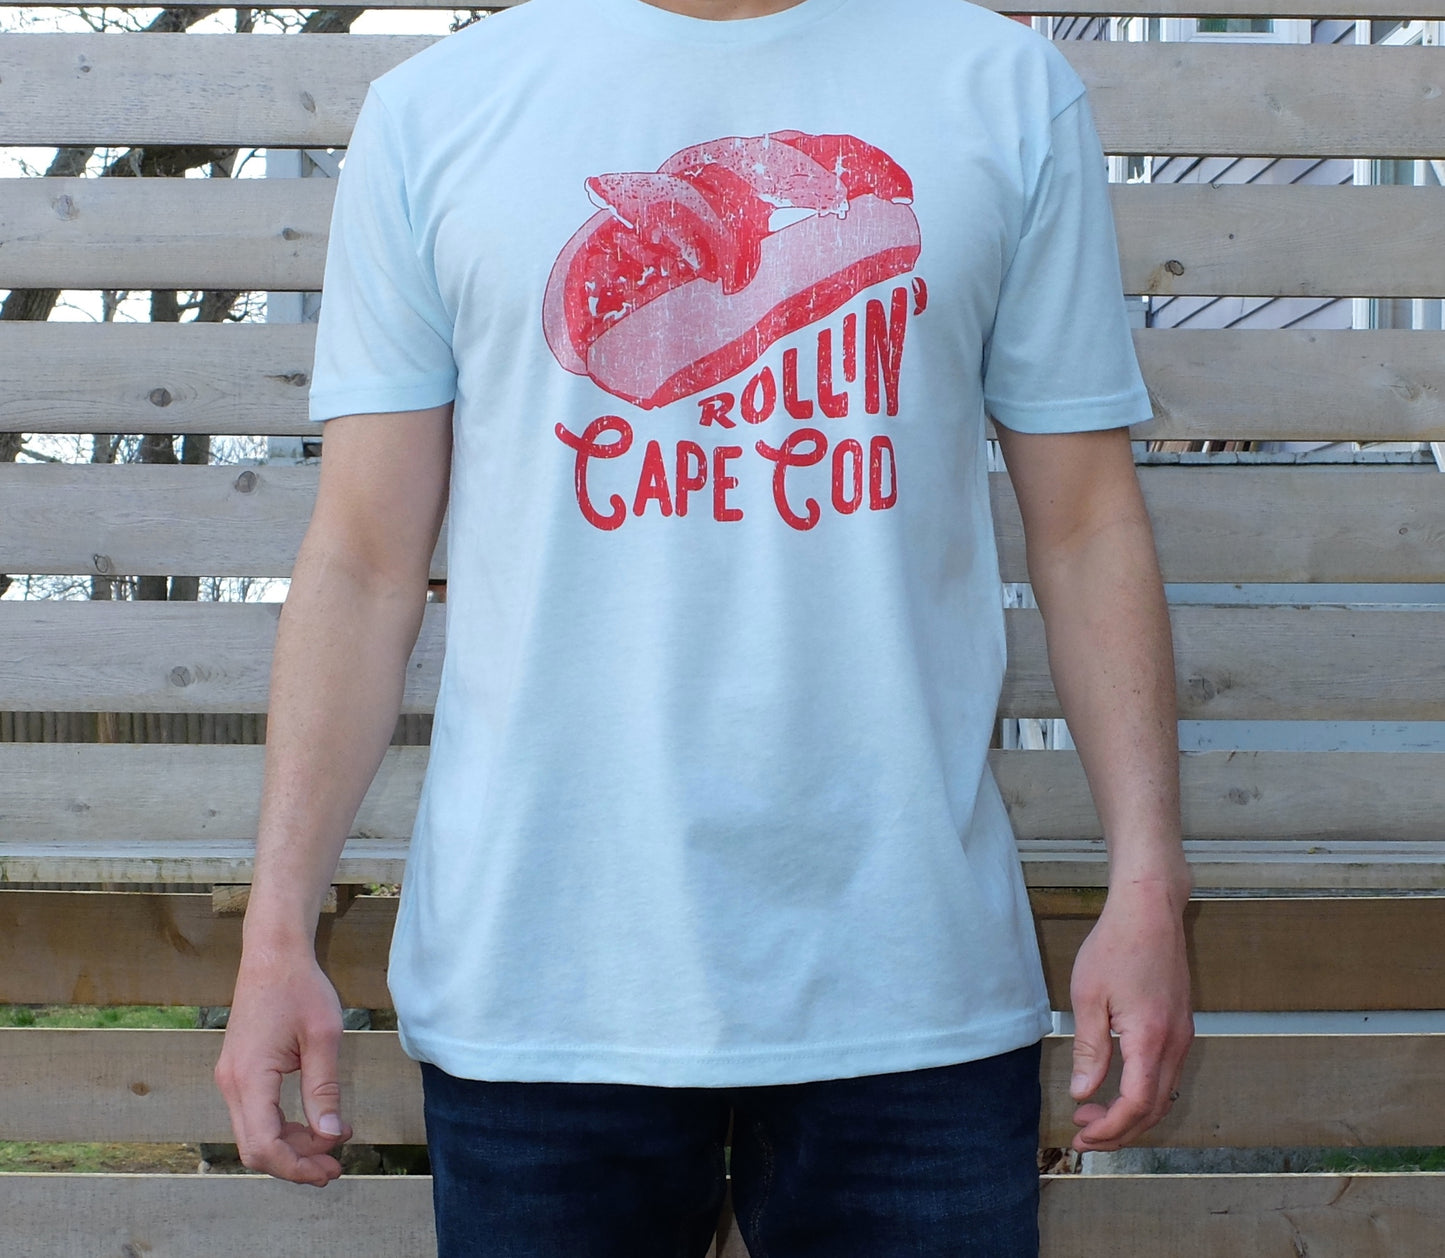 man wearing light blue t-shirt with red lobster roll graphic and Rollin' Cape Cod text